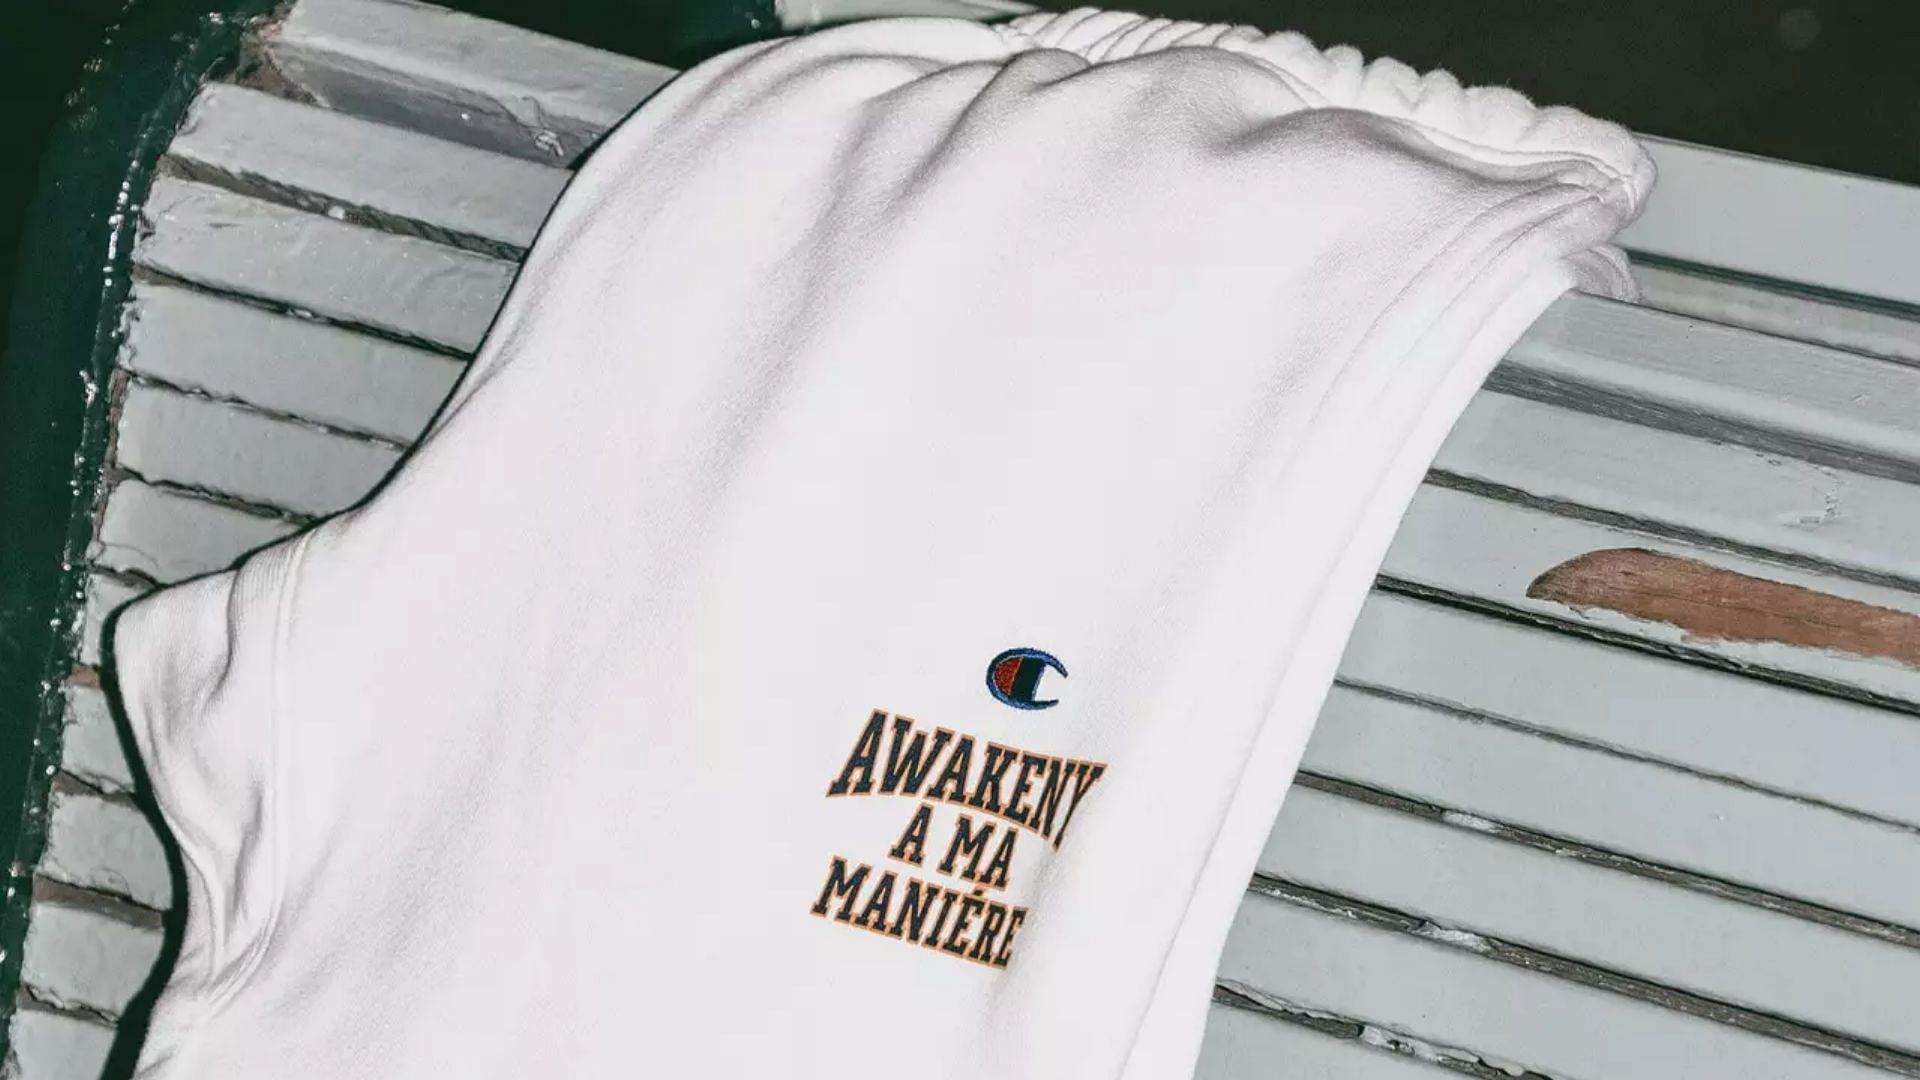 newly launched 9-piece A Ma Maniere x Awake NY COLOR CODE apparel collection (Image via A Ma Maniere)